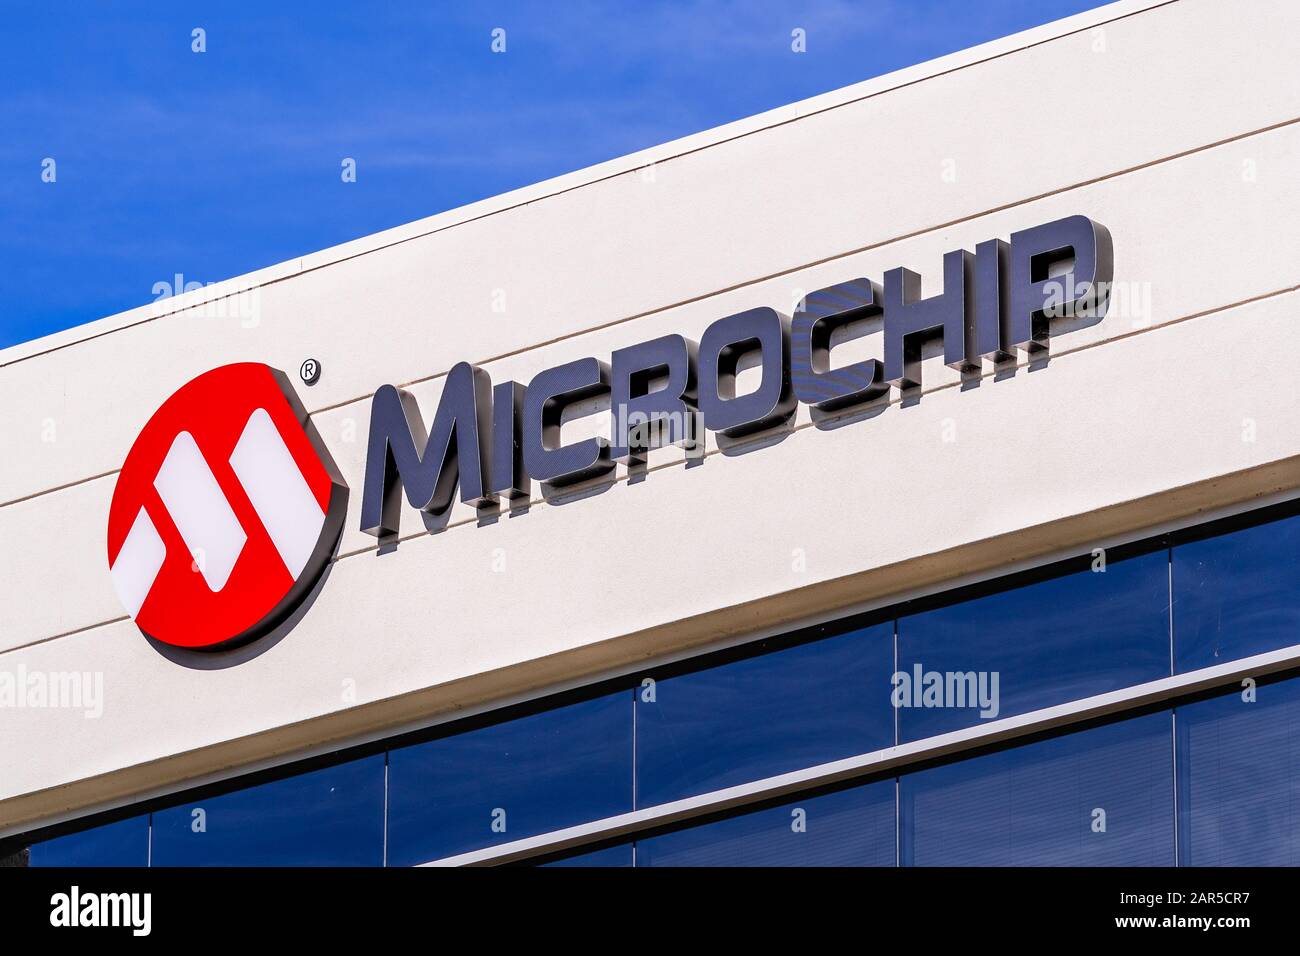 Jan 24, 2020 Sunnyvale / CA / USA - Microchip sign at their HQ in Silicon Valley; Microchip Technology Inc. manufactures microcontrollers, mixed-signa Stock Photo